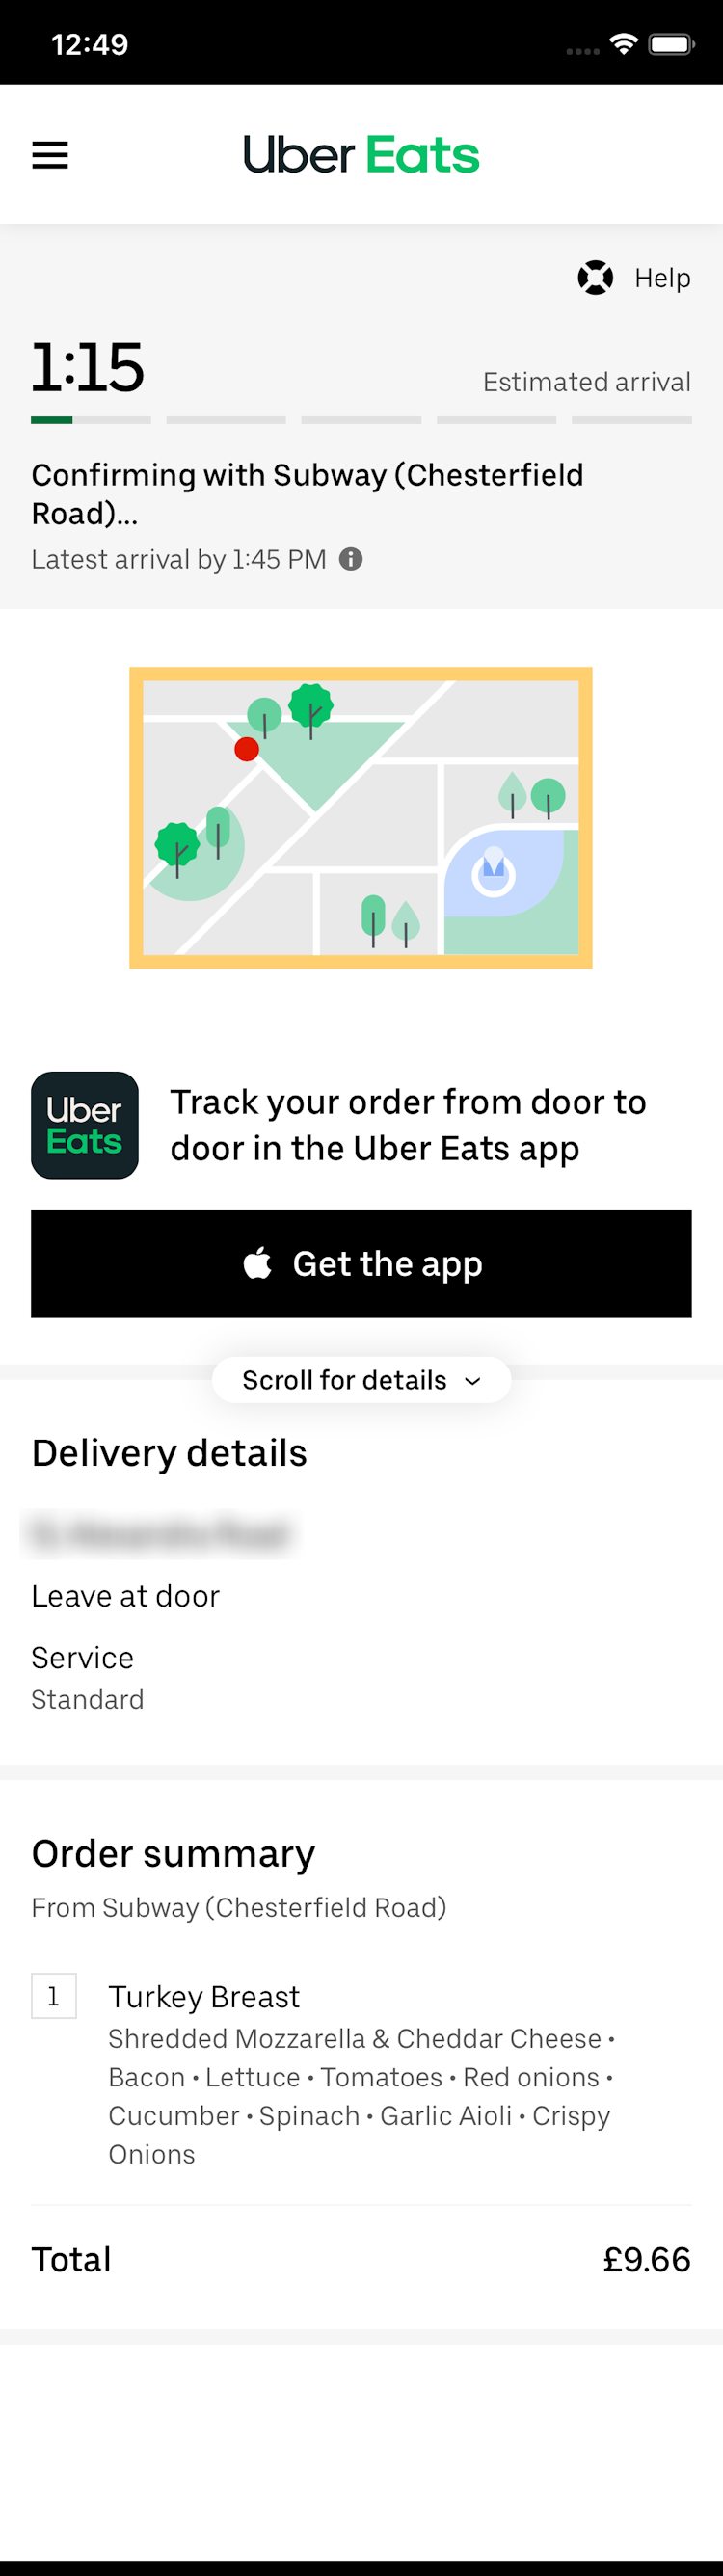 How To Get A Receipt From Uber Eats